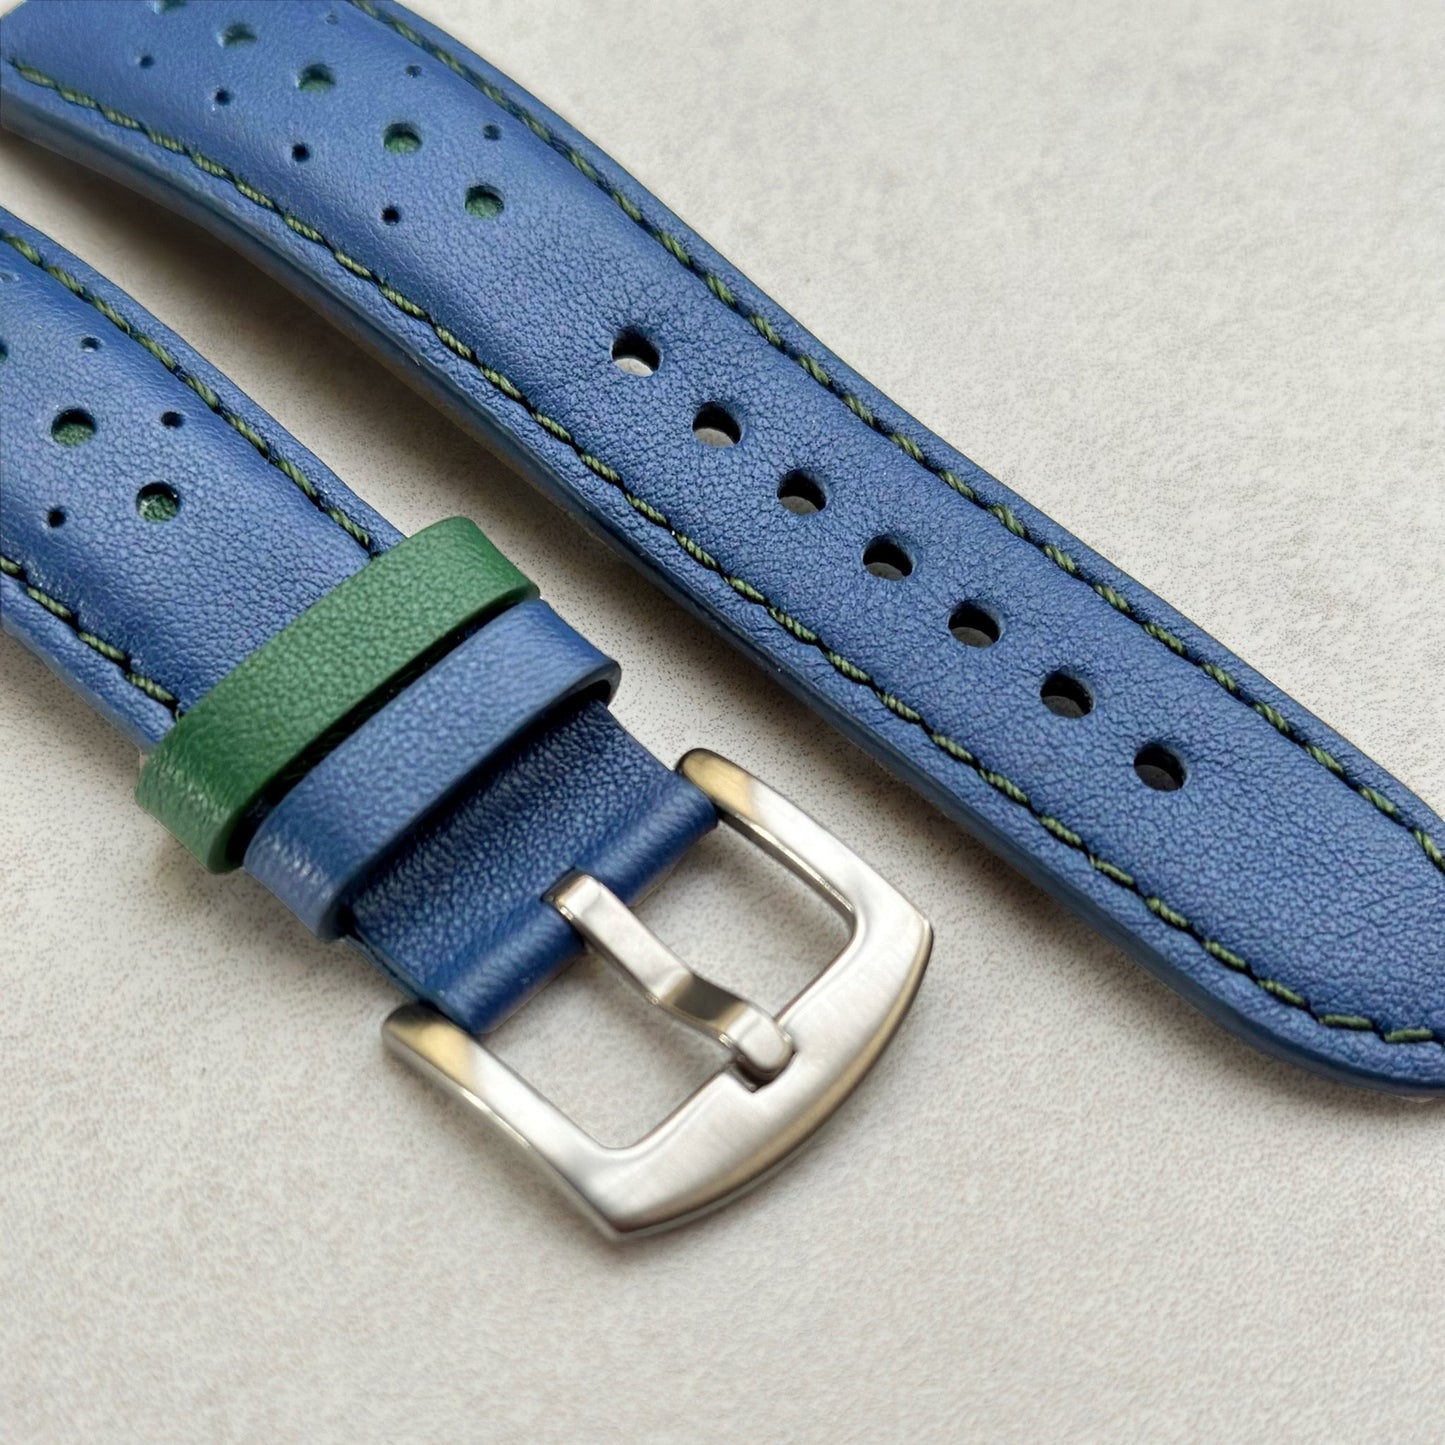 Brushed 316L stainless steel buckle on the Le Mans Blue and Green apple watch strap.